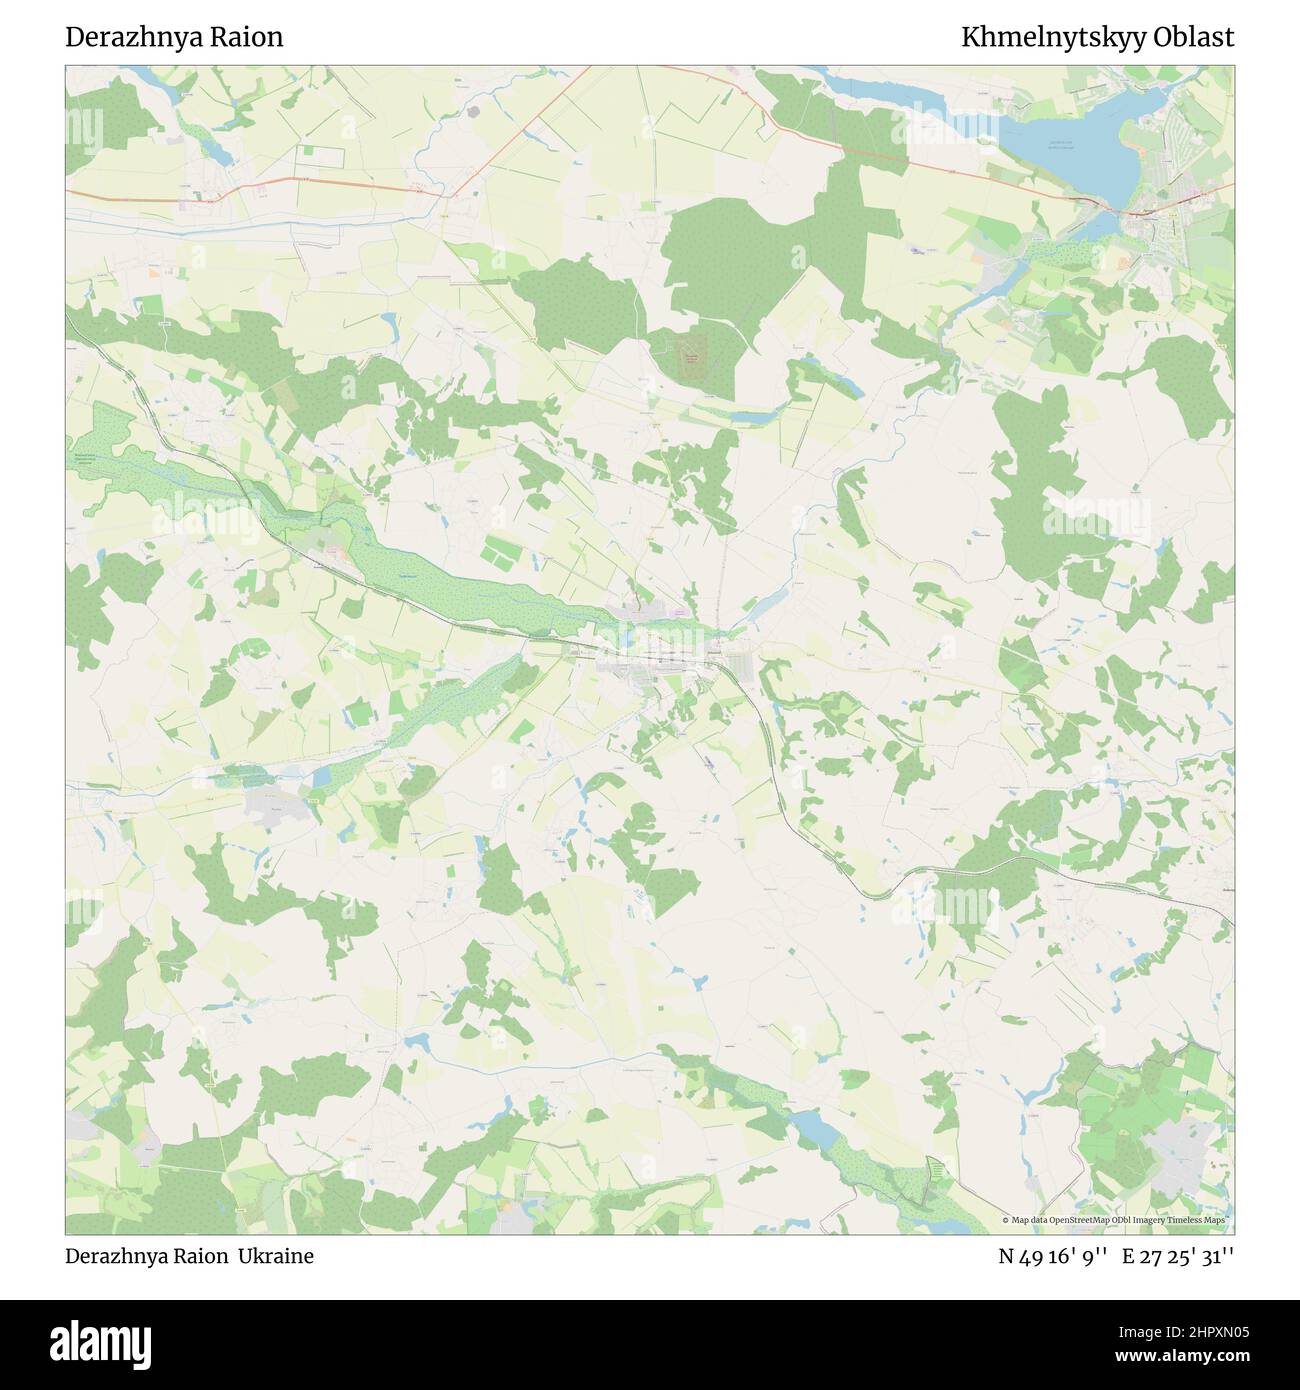 Derazhnya Raion, Derazhnya Raion, Ukraine, Khmelnytskyy Oblast, N 49 16' 9'', E 27 25' 31'', map, Timeless Map published in 2021. Travelers, explorers and adventurers like Florence Nightingale, David Livingstone, Ernest Shackleton, Lewis and Clark and Sherlock Holmes relied on maps to plan travels to the world's most remote corners, Timeless Maps is mapping most locations on the globe, showing the achievement of great dreams Stock Photo